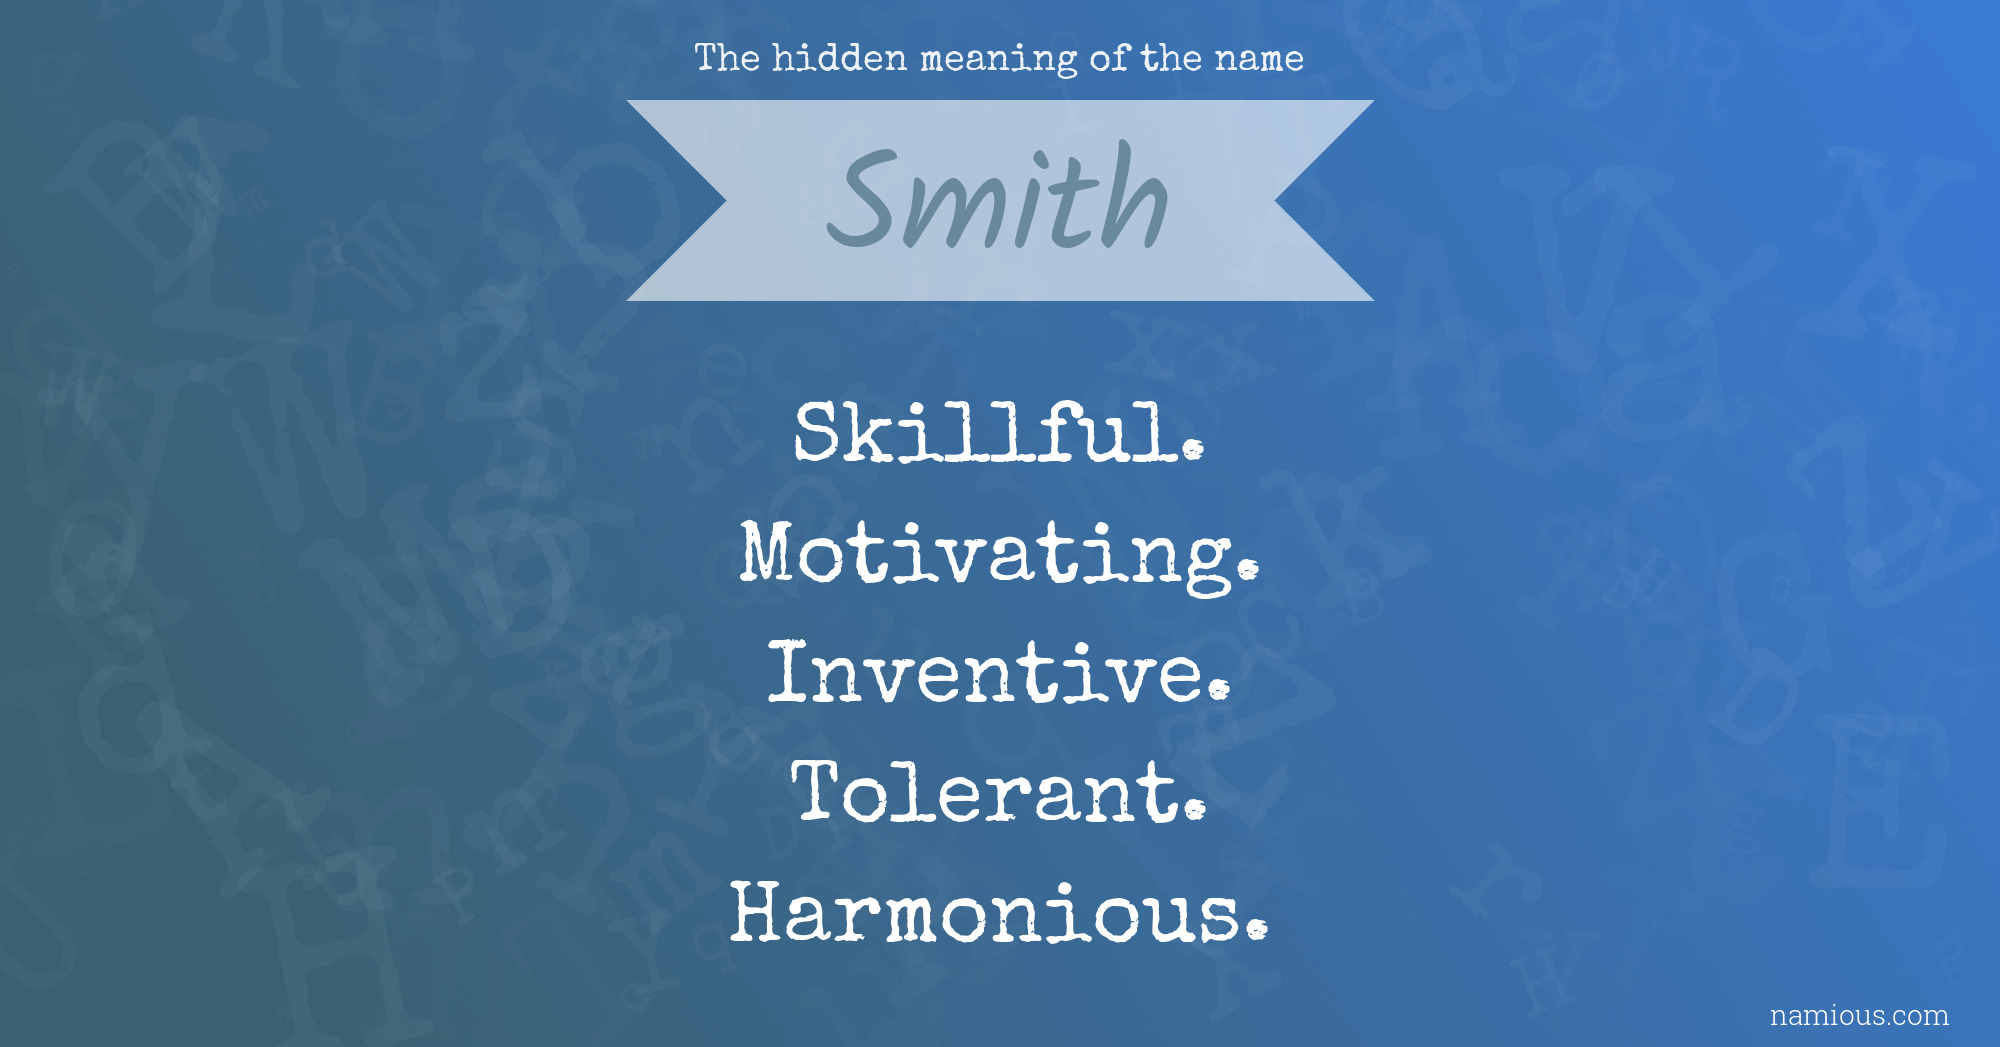 The hidden meaning of the name Smith